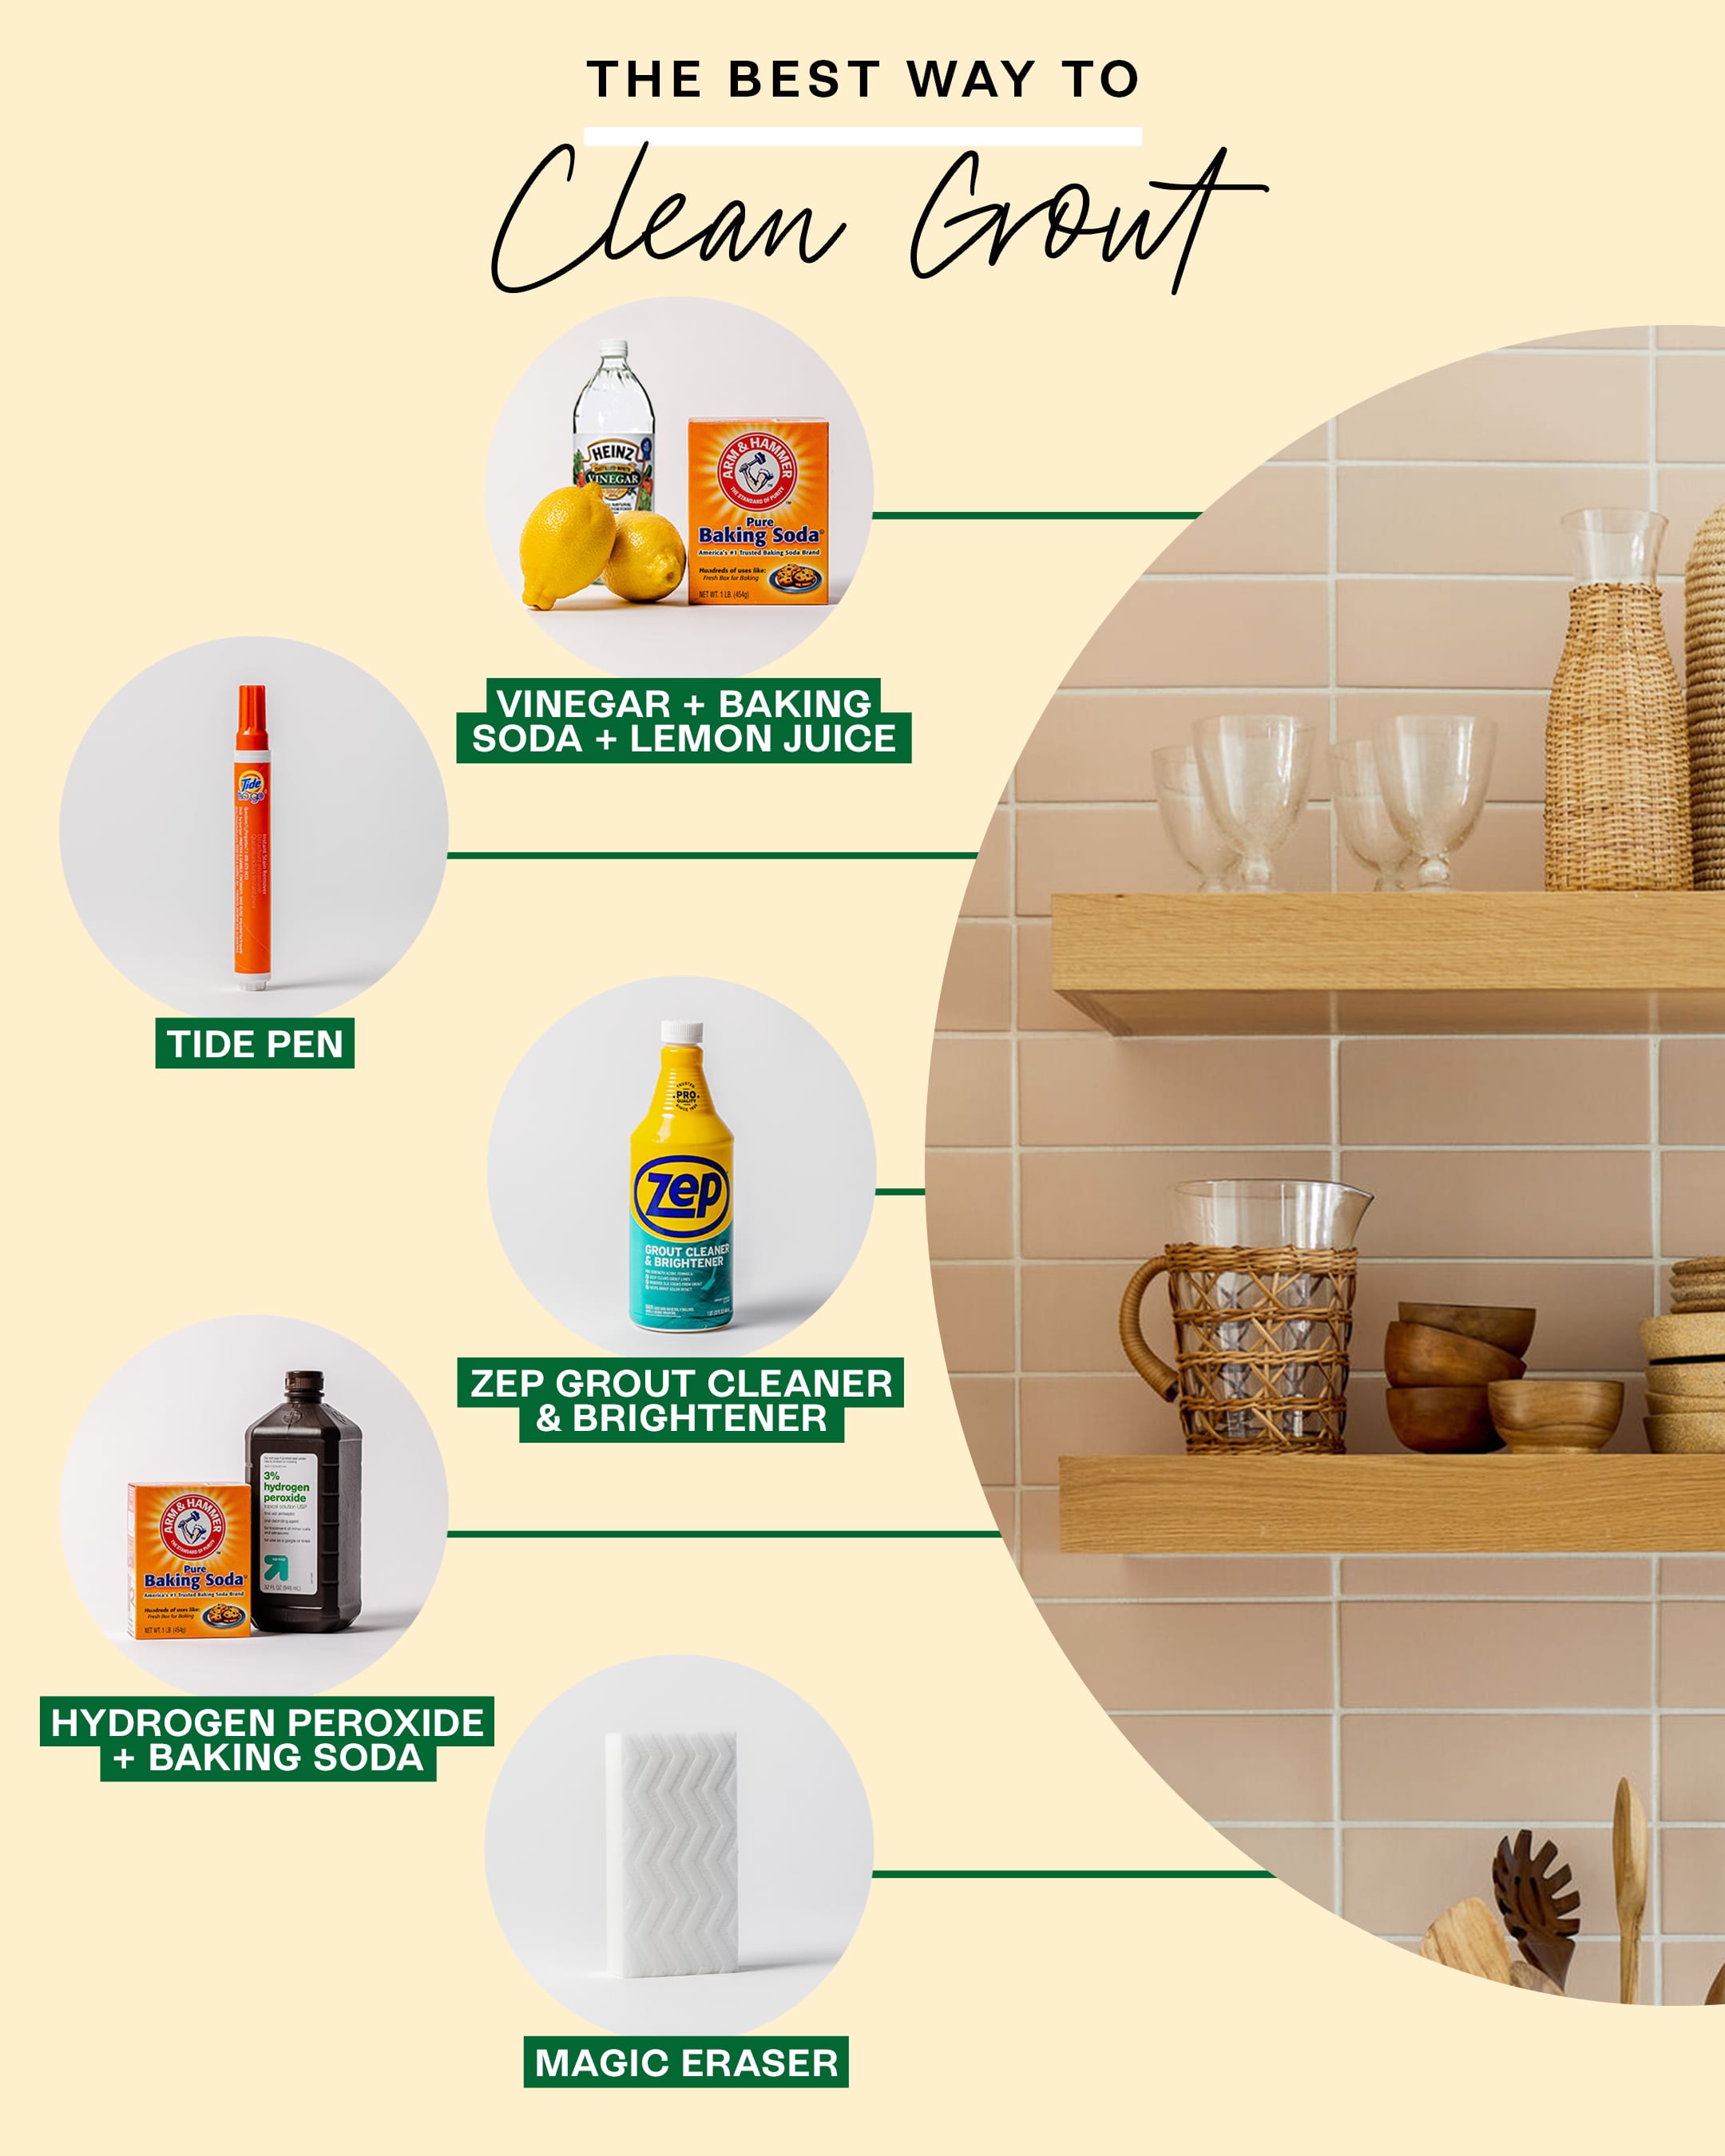 How To Clean Grout With A Homemade Grout Cleaner – Practically